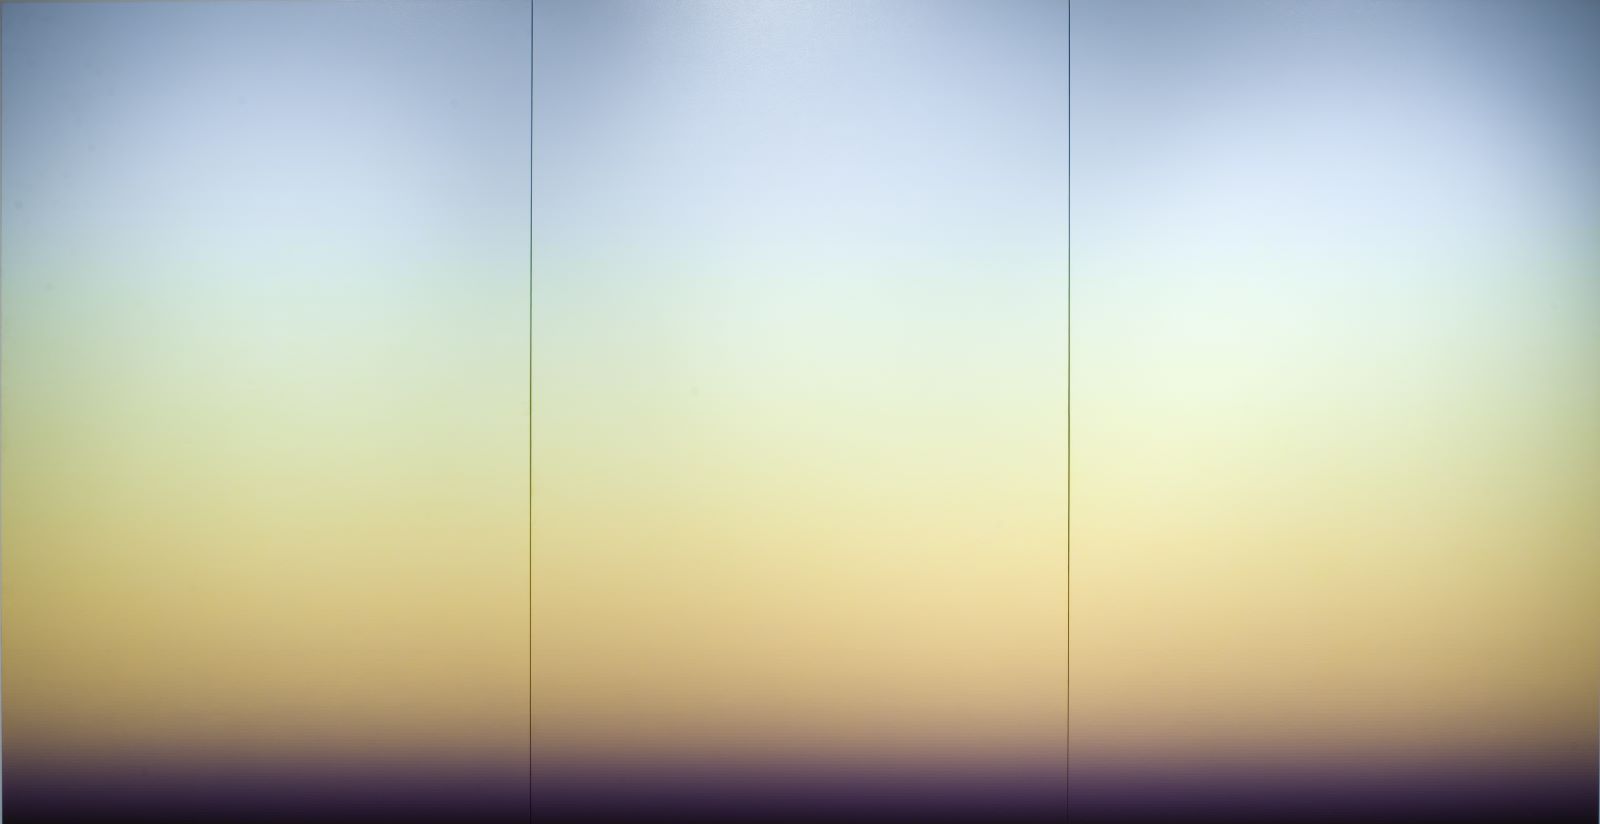 A rectangular image with grandient colors that start off deep purple, orange, yellow and blue at the top.